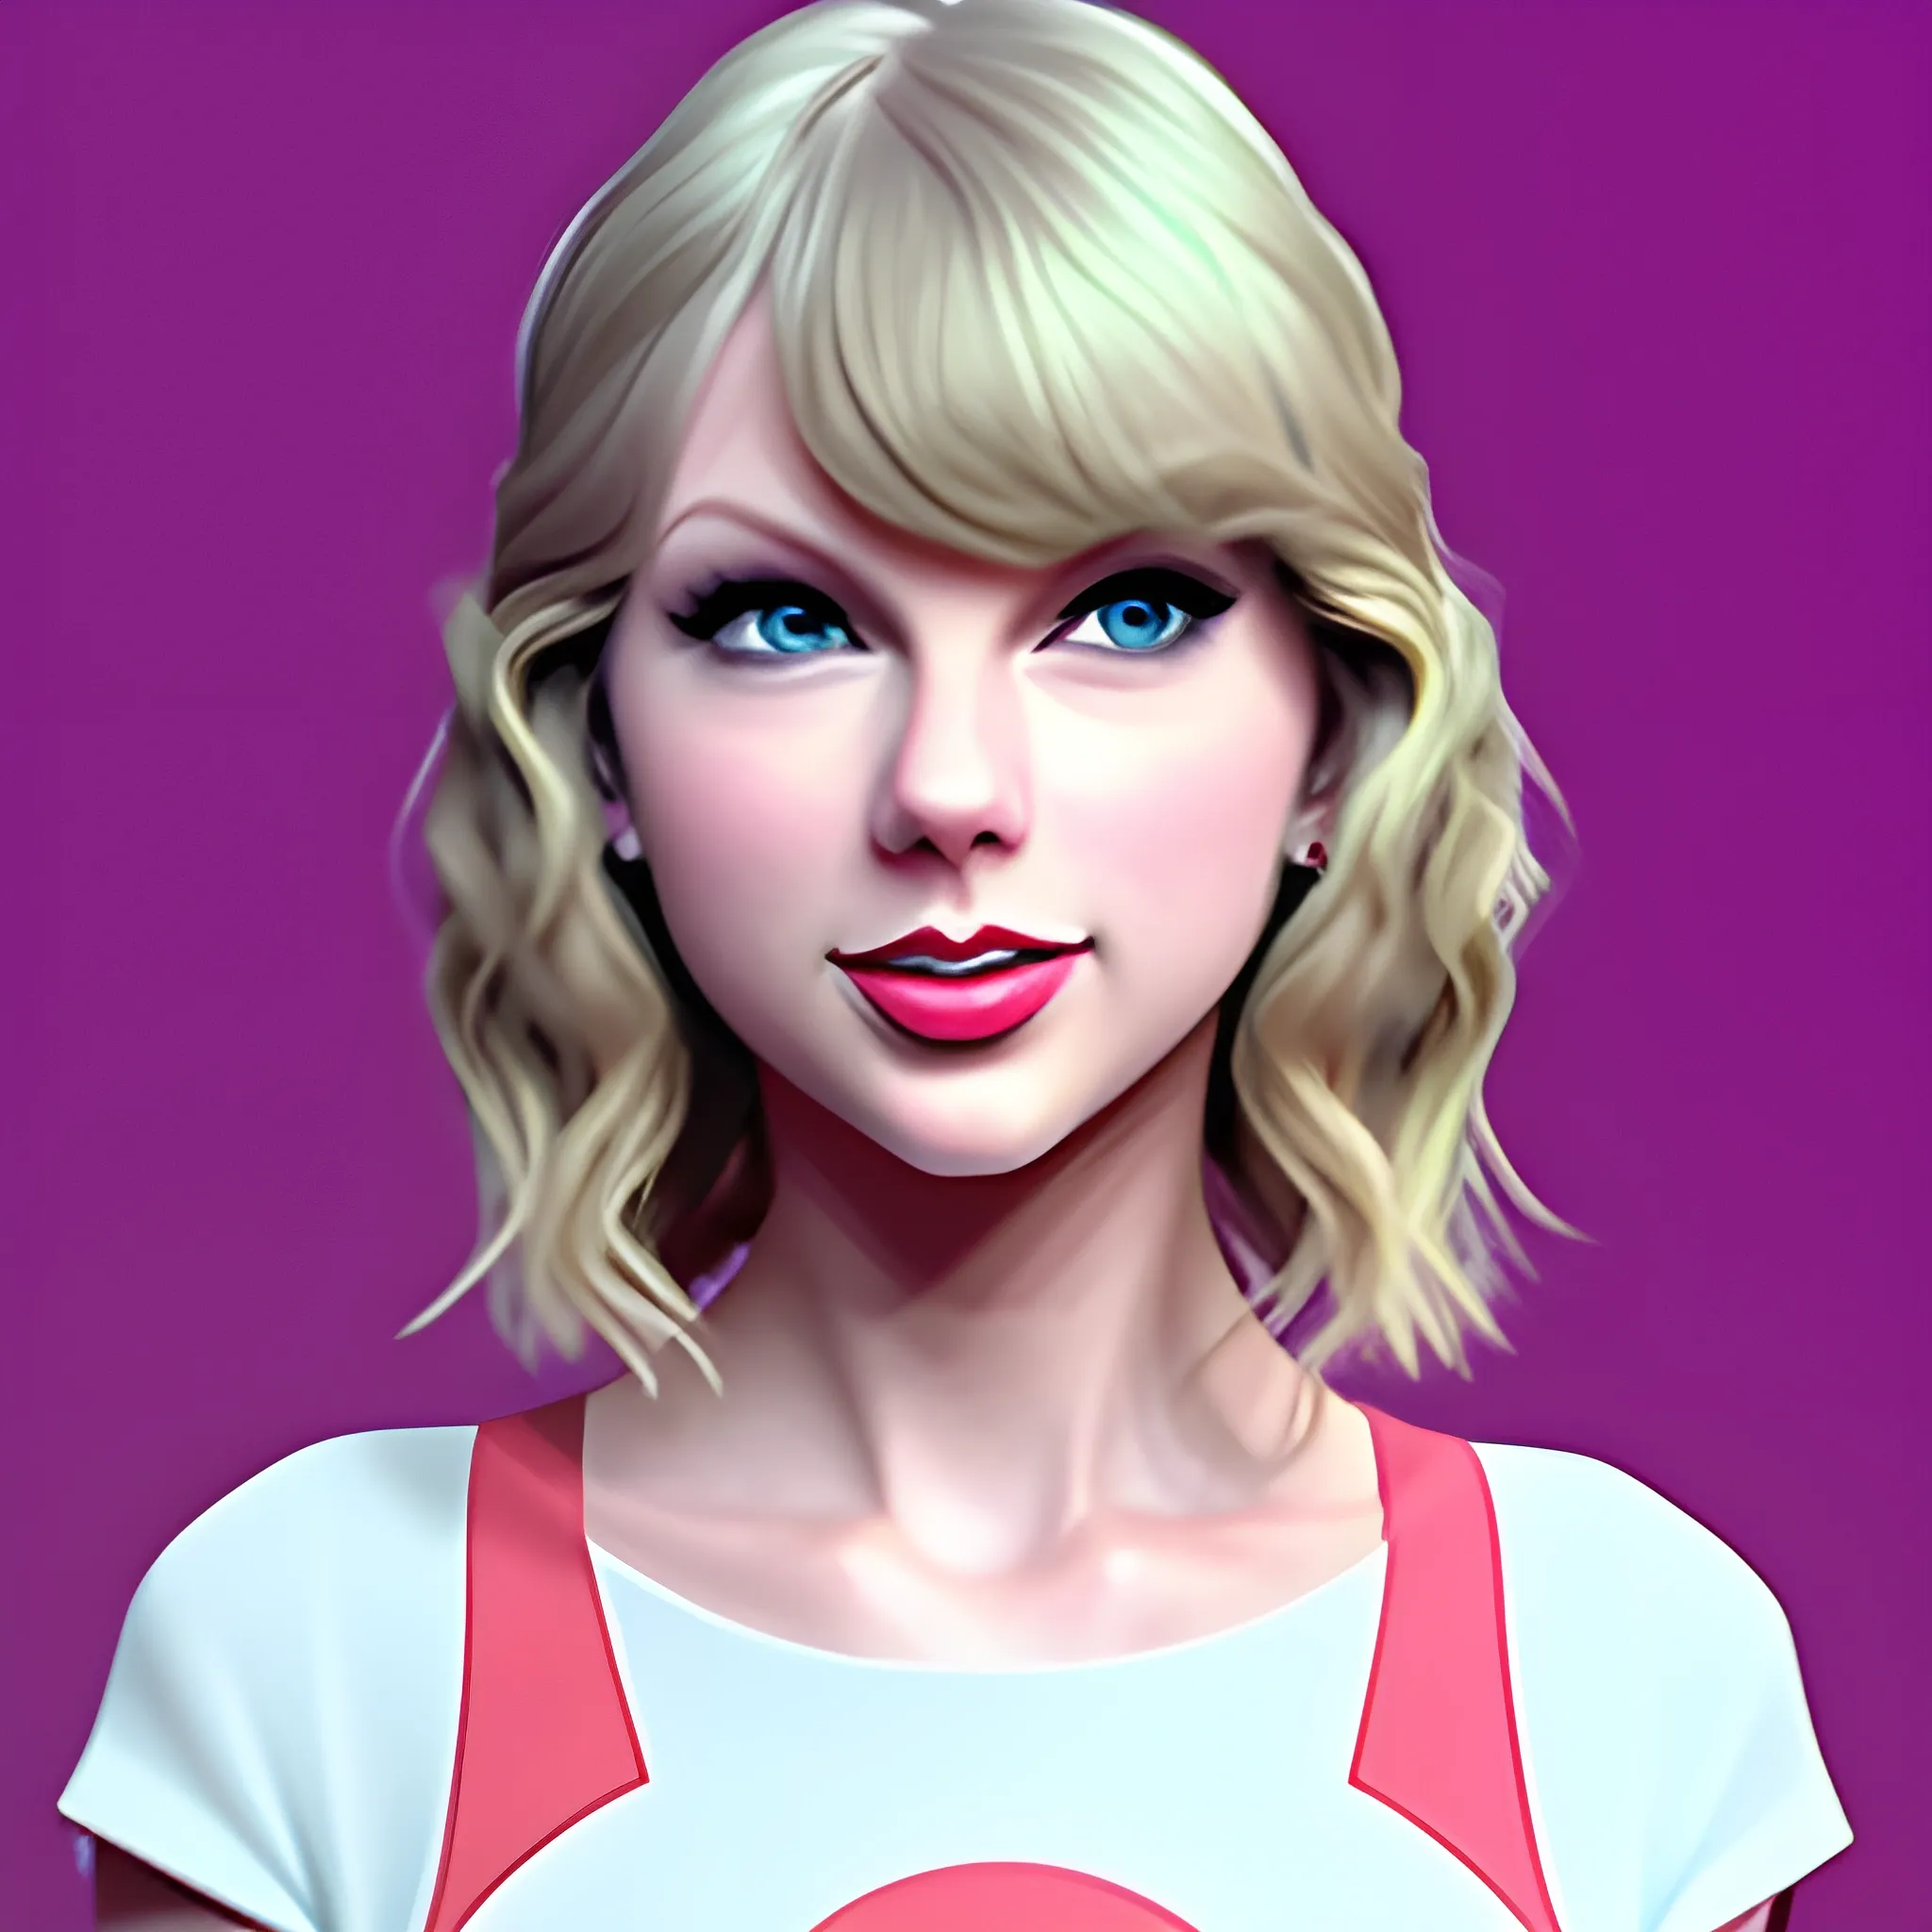 taylor swift standing centered, looking forward direct at camera, smiling, 3D, Cartoon